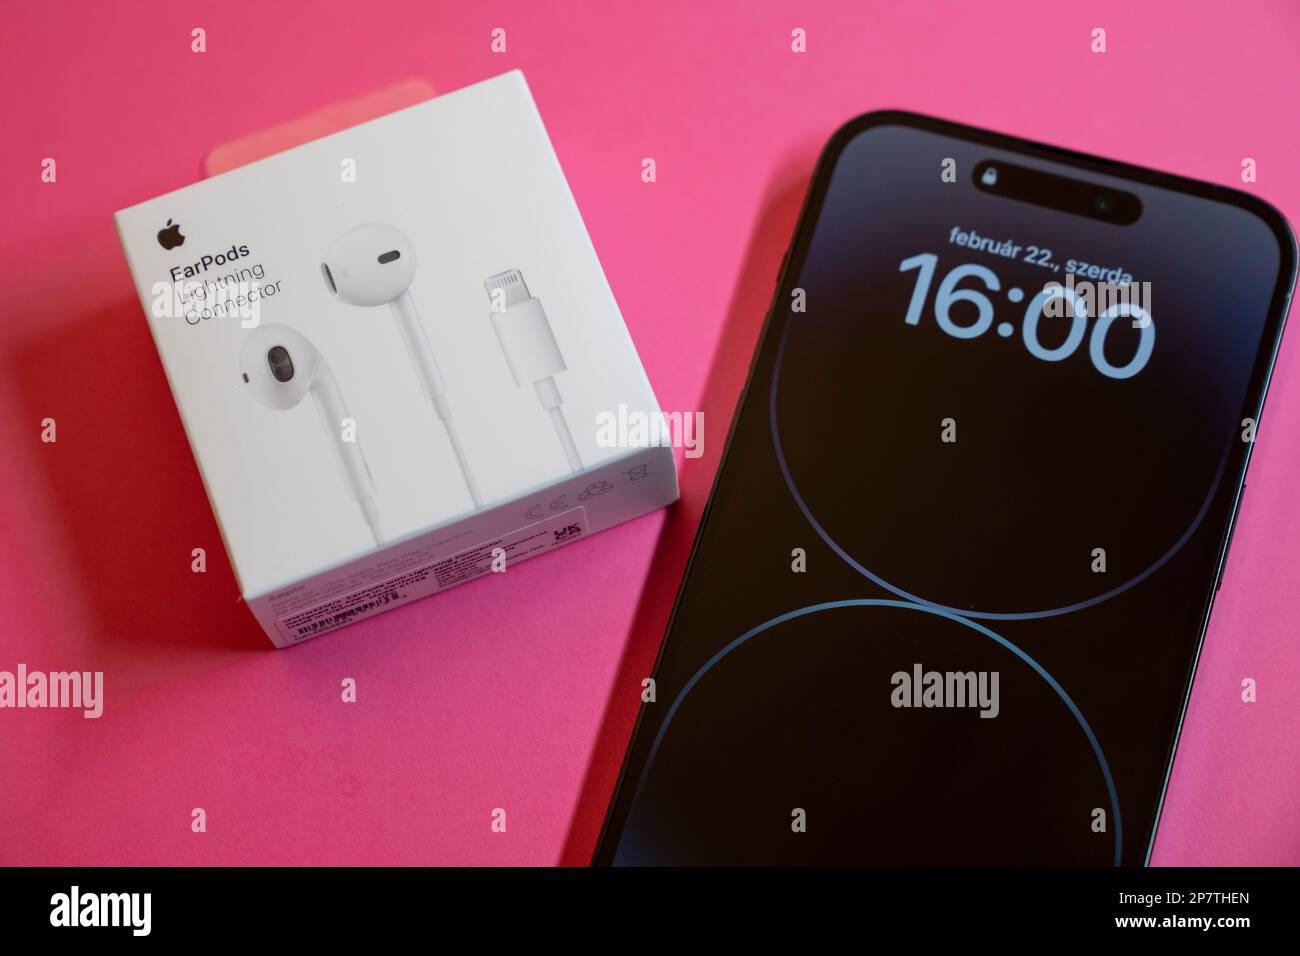 New iPhone 14 pro max and Apple Earpods, Airpods white earphones for listening to music and podcasts, in a closed box. Isolated pink background. Budap Stock Photo